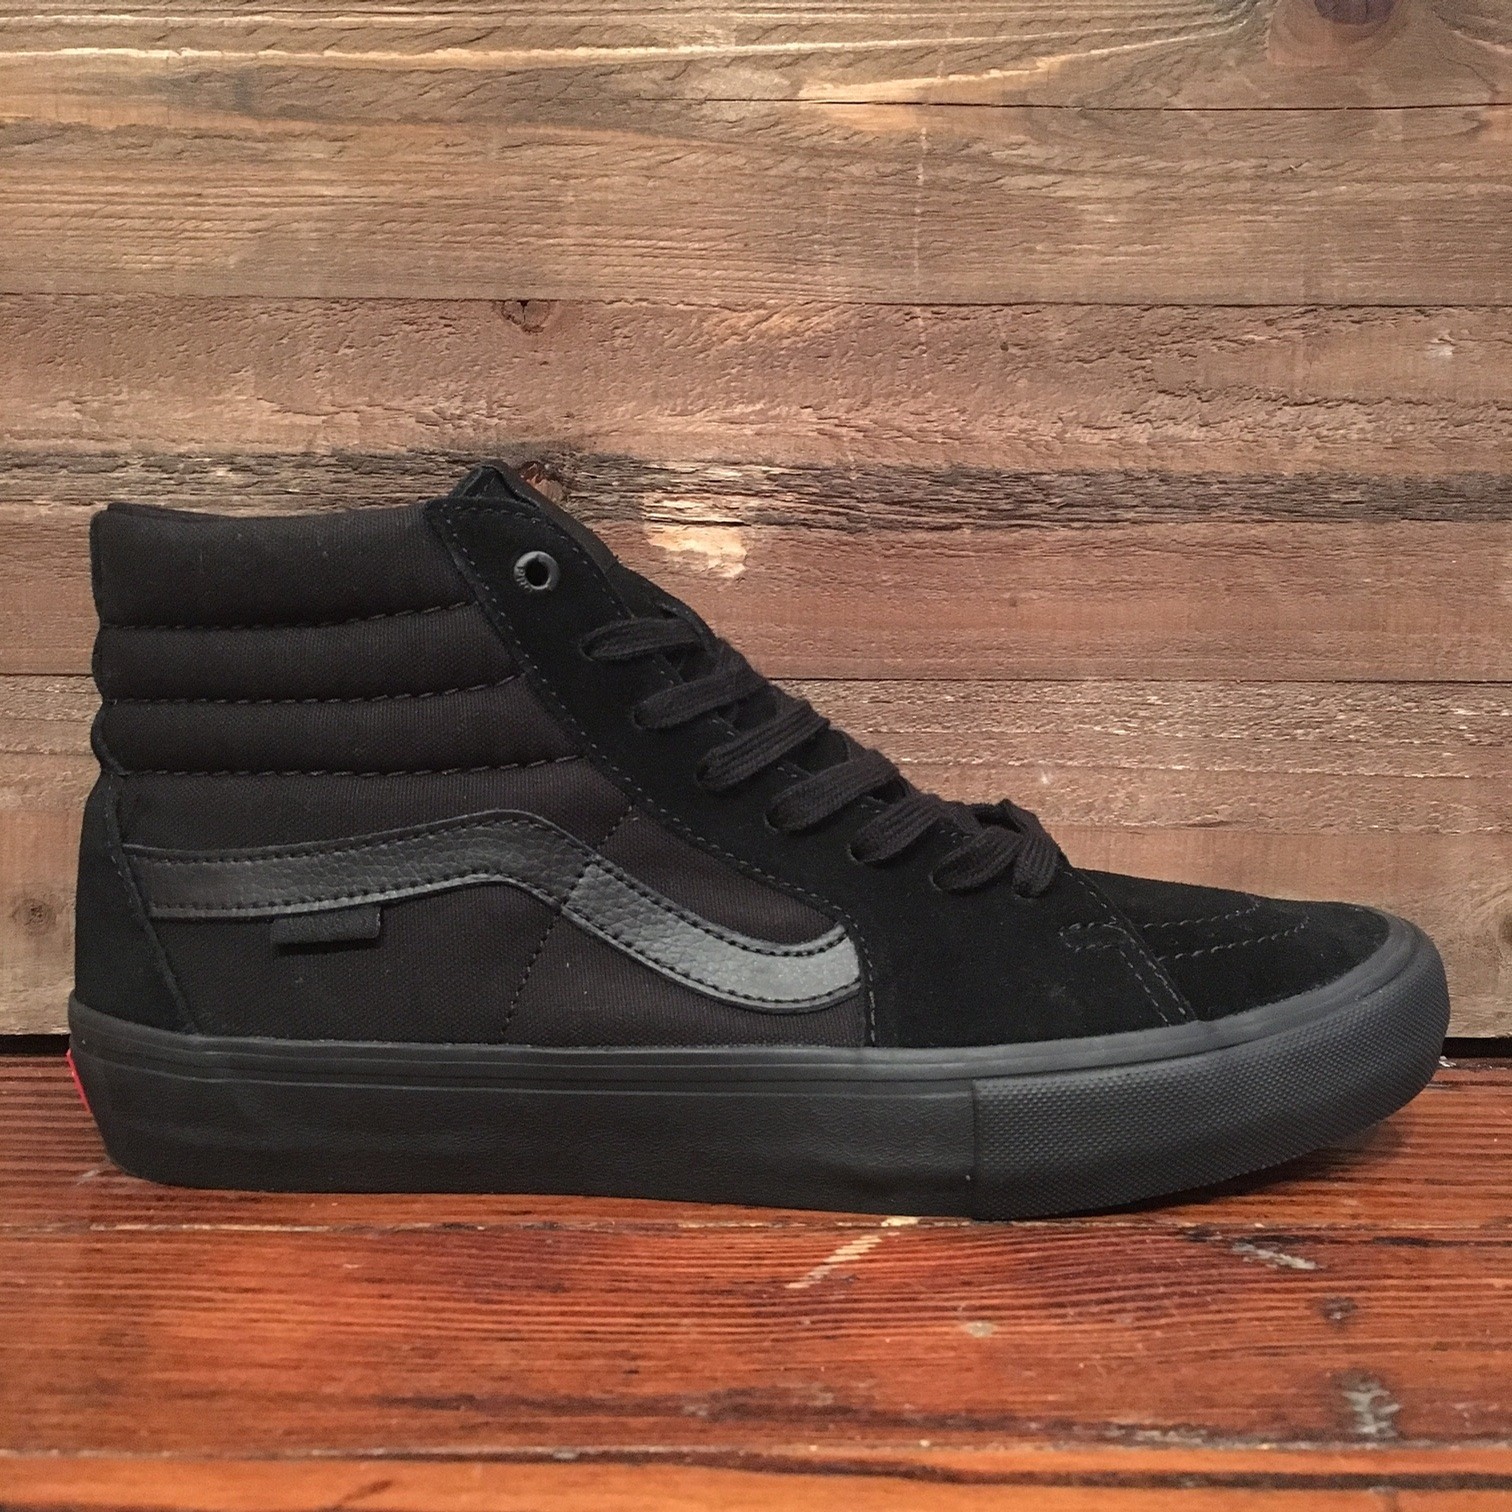 blacked out vans